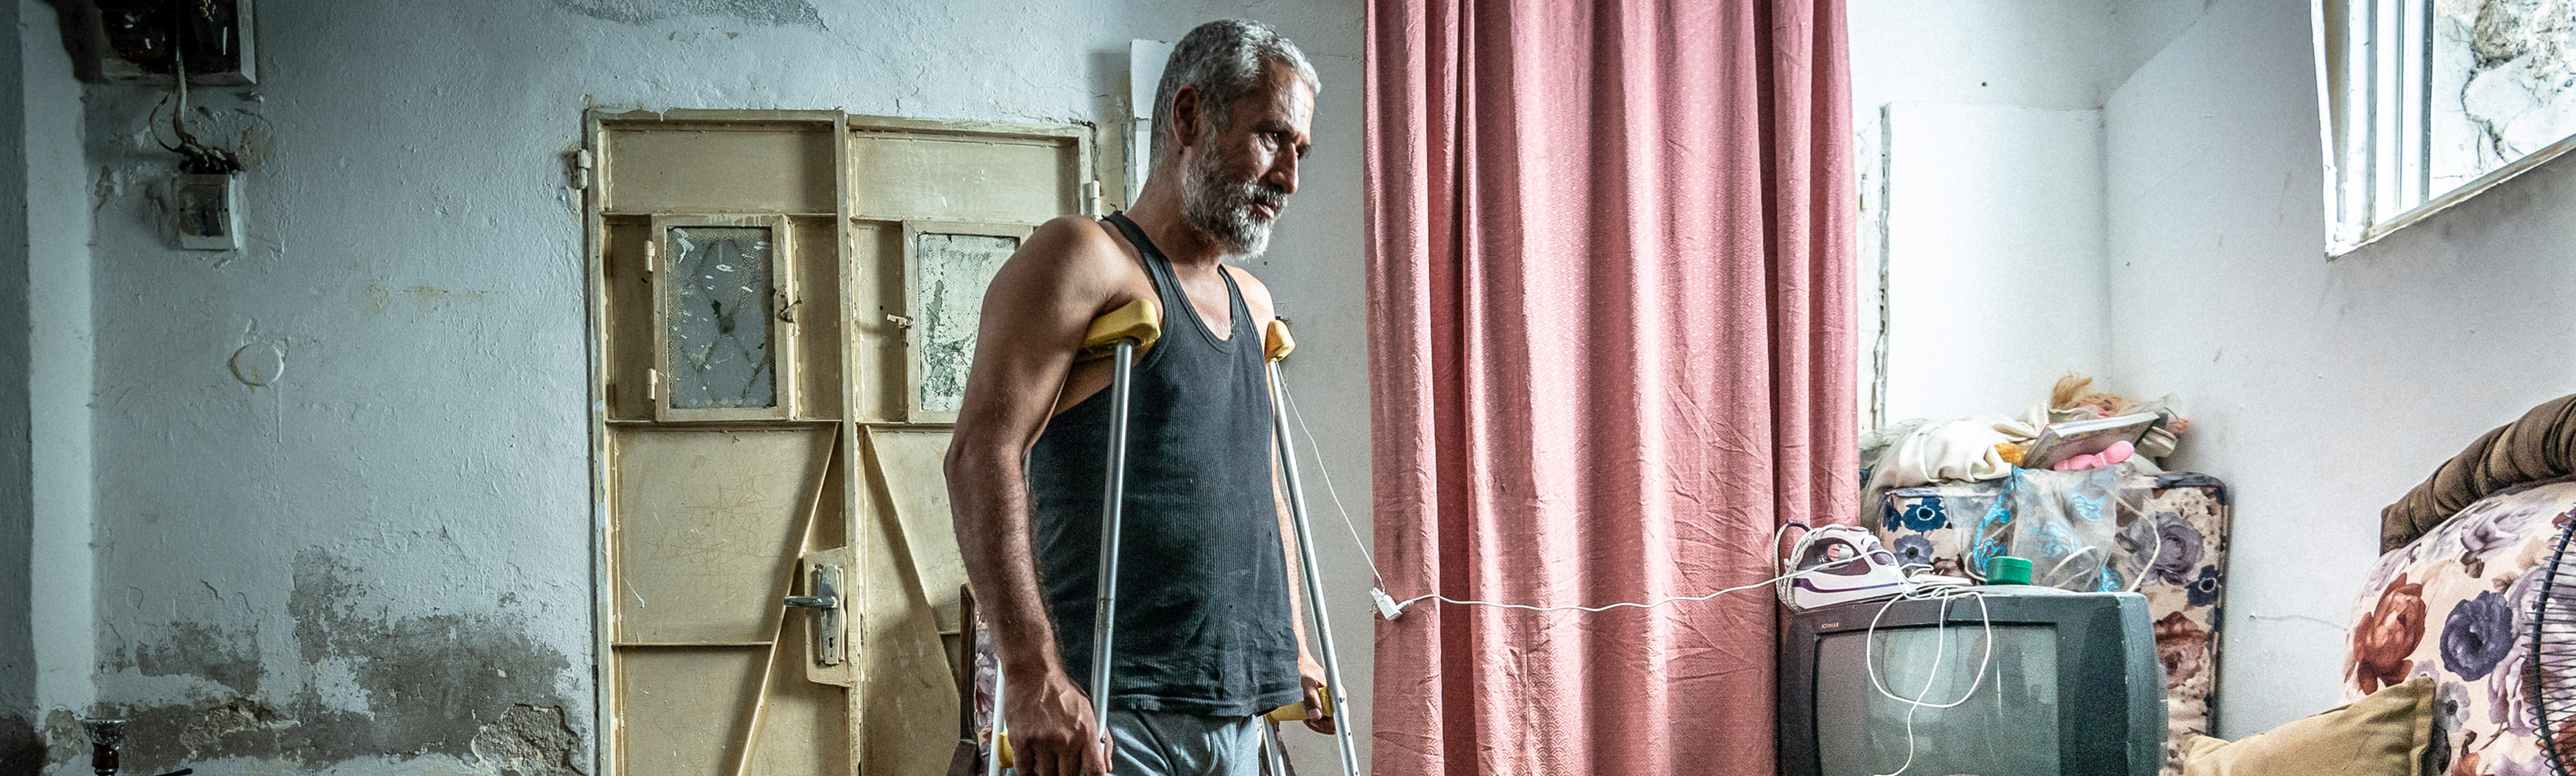 Jordan, Ibrahim was wounded in the leg during a bombing in Syria. He moves with the help of crutches.